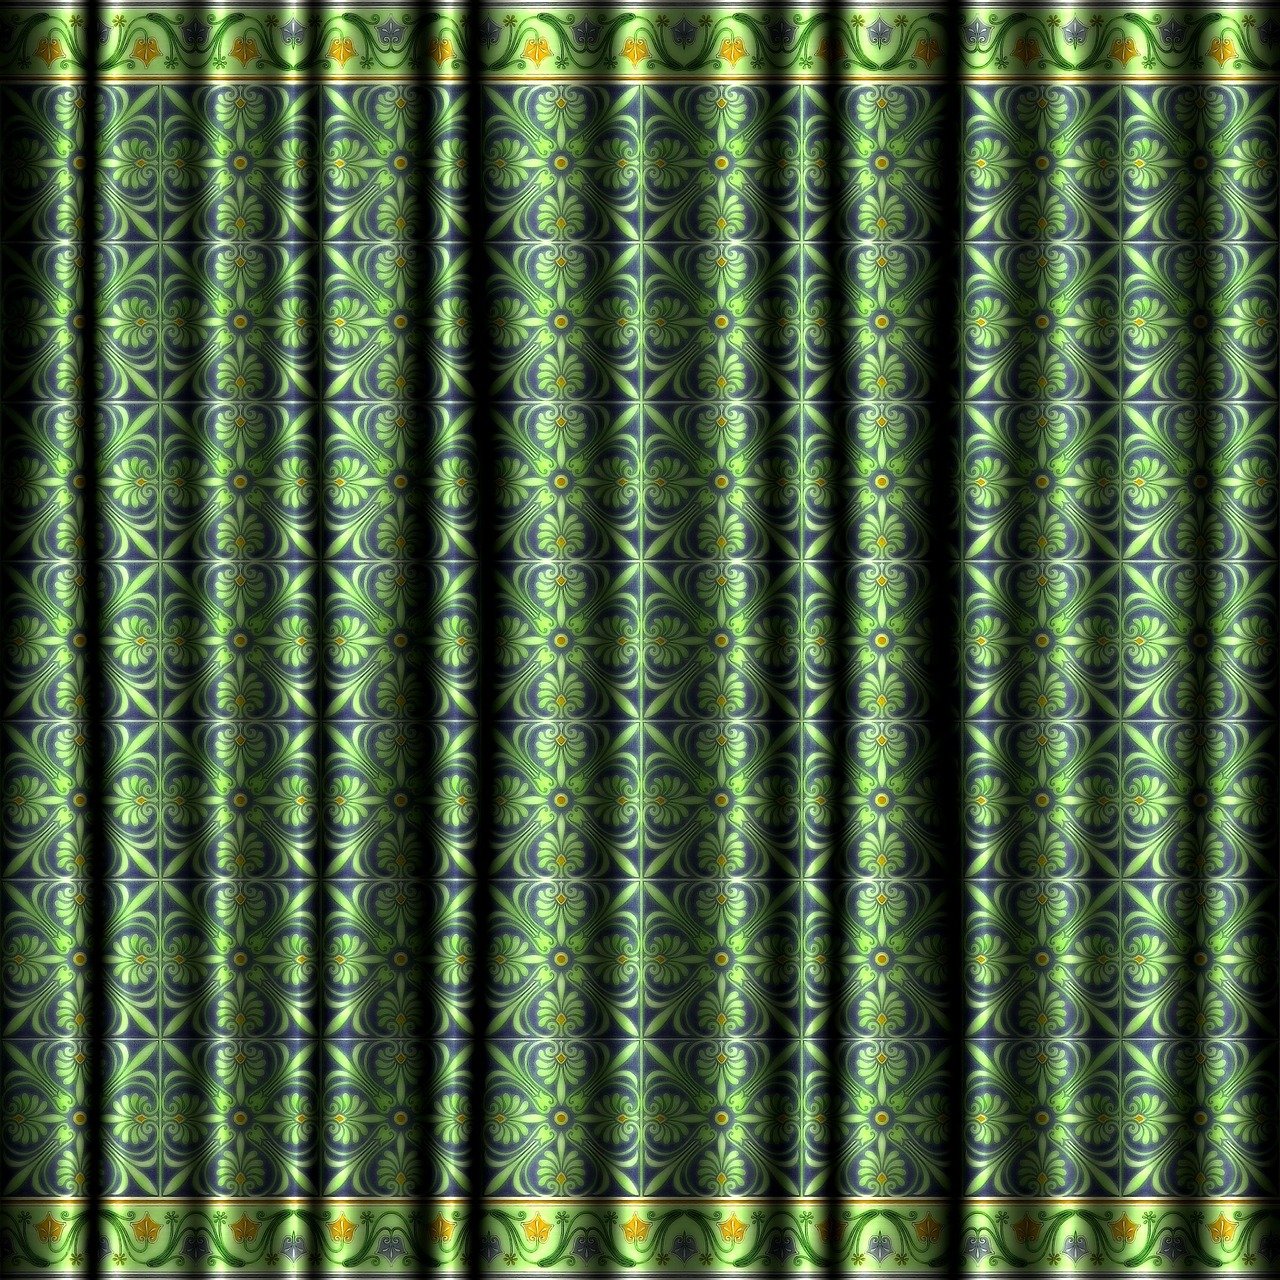 a green curtain with a pattern on it, a digital rendering, inspired by Art Green, deviantart, magic eye, dark blue and green tones, green and yellow colors, camera photo